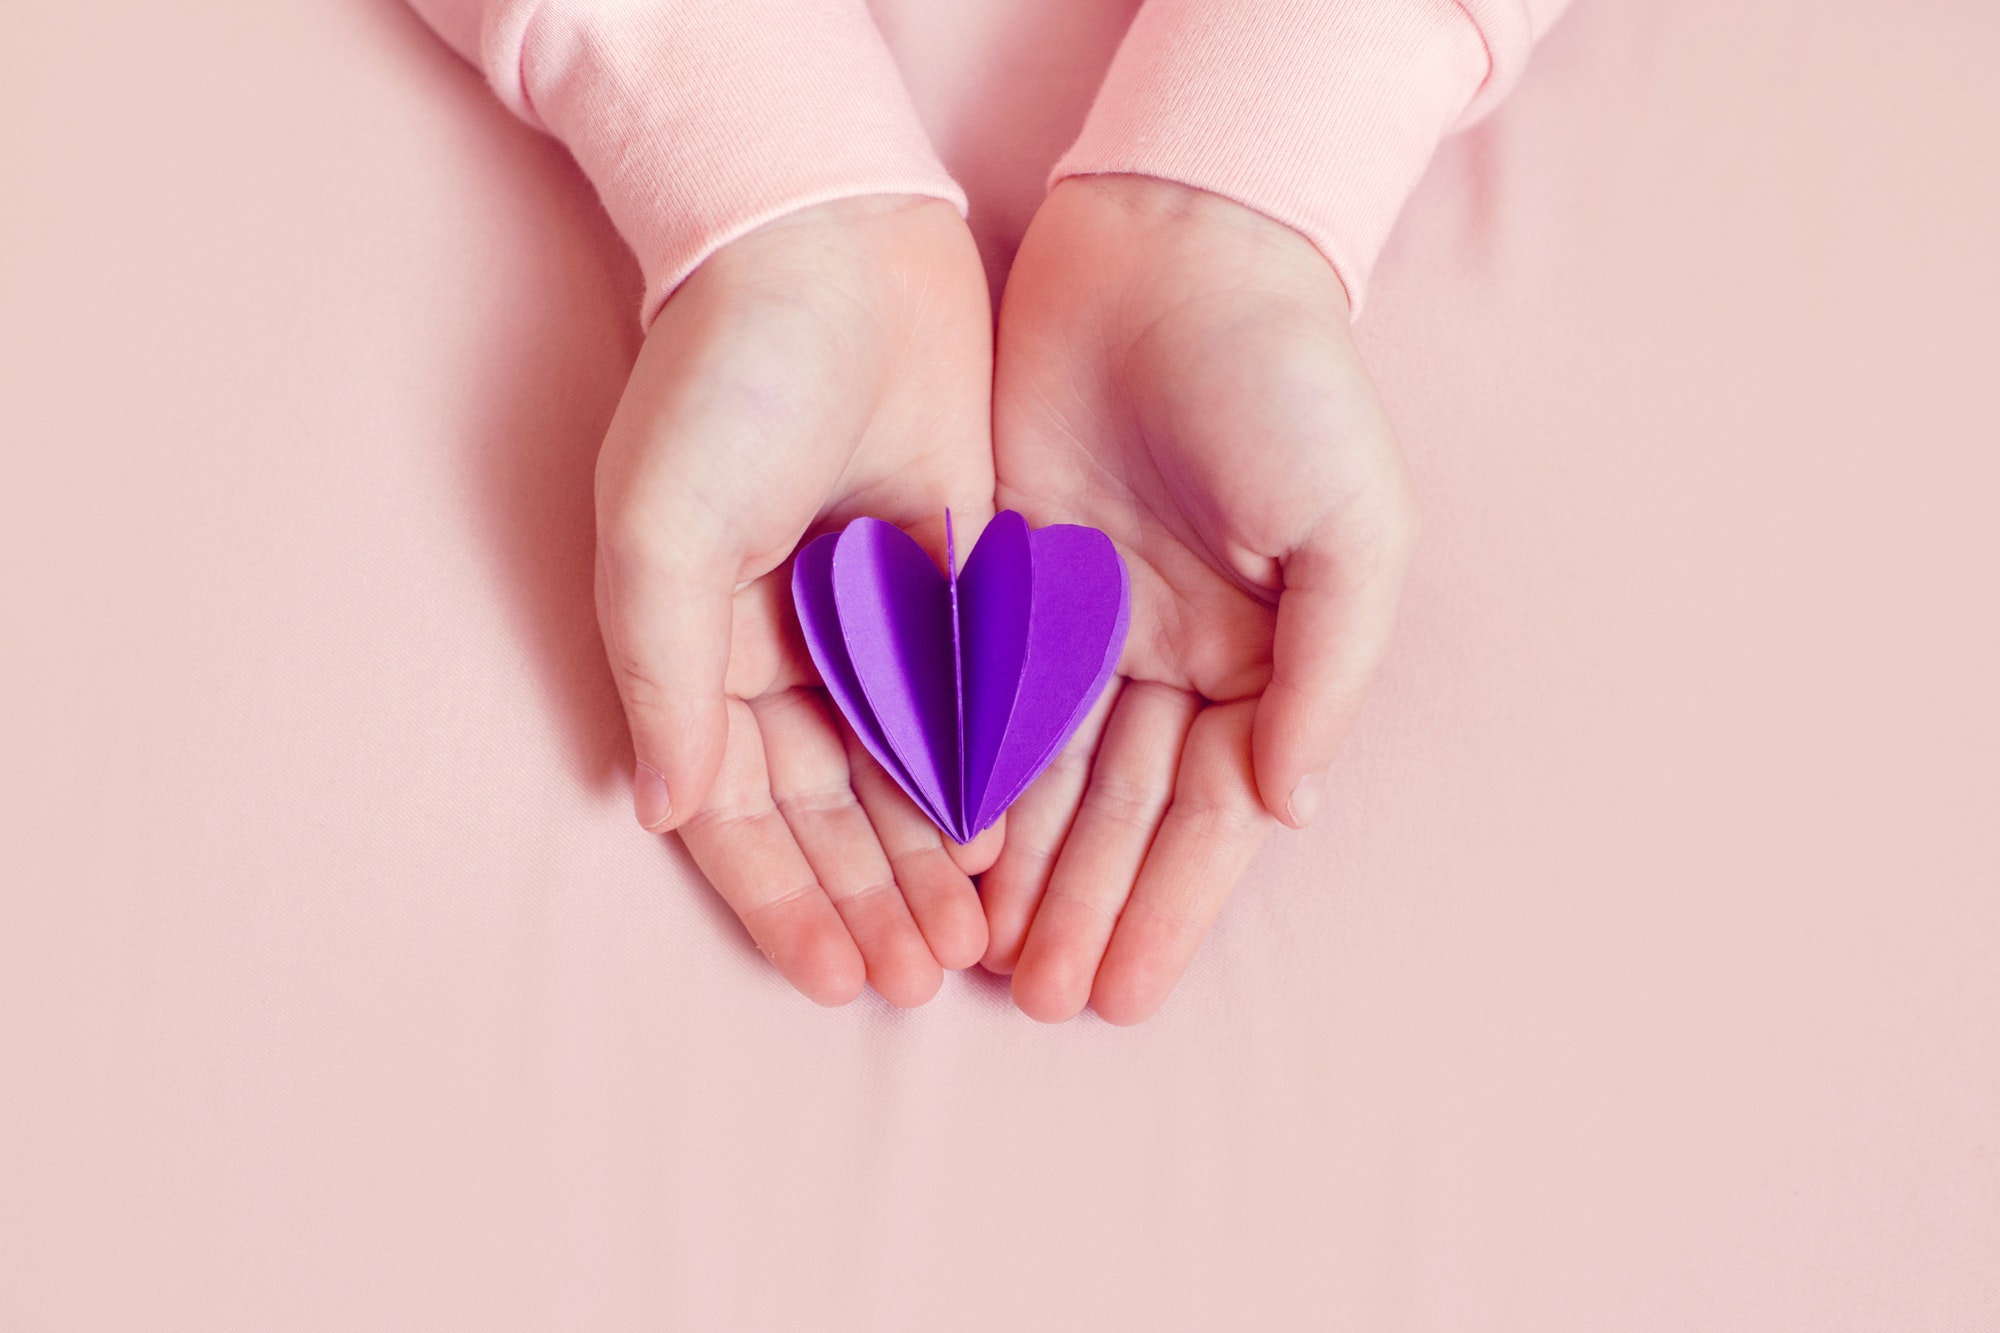 Kids child hands holding purple violet paper heart. Epilepsy awareness day. Care, health, support.